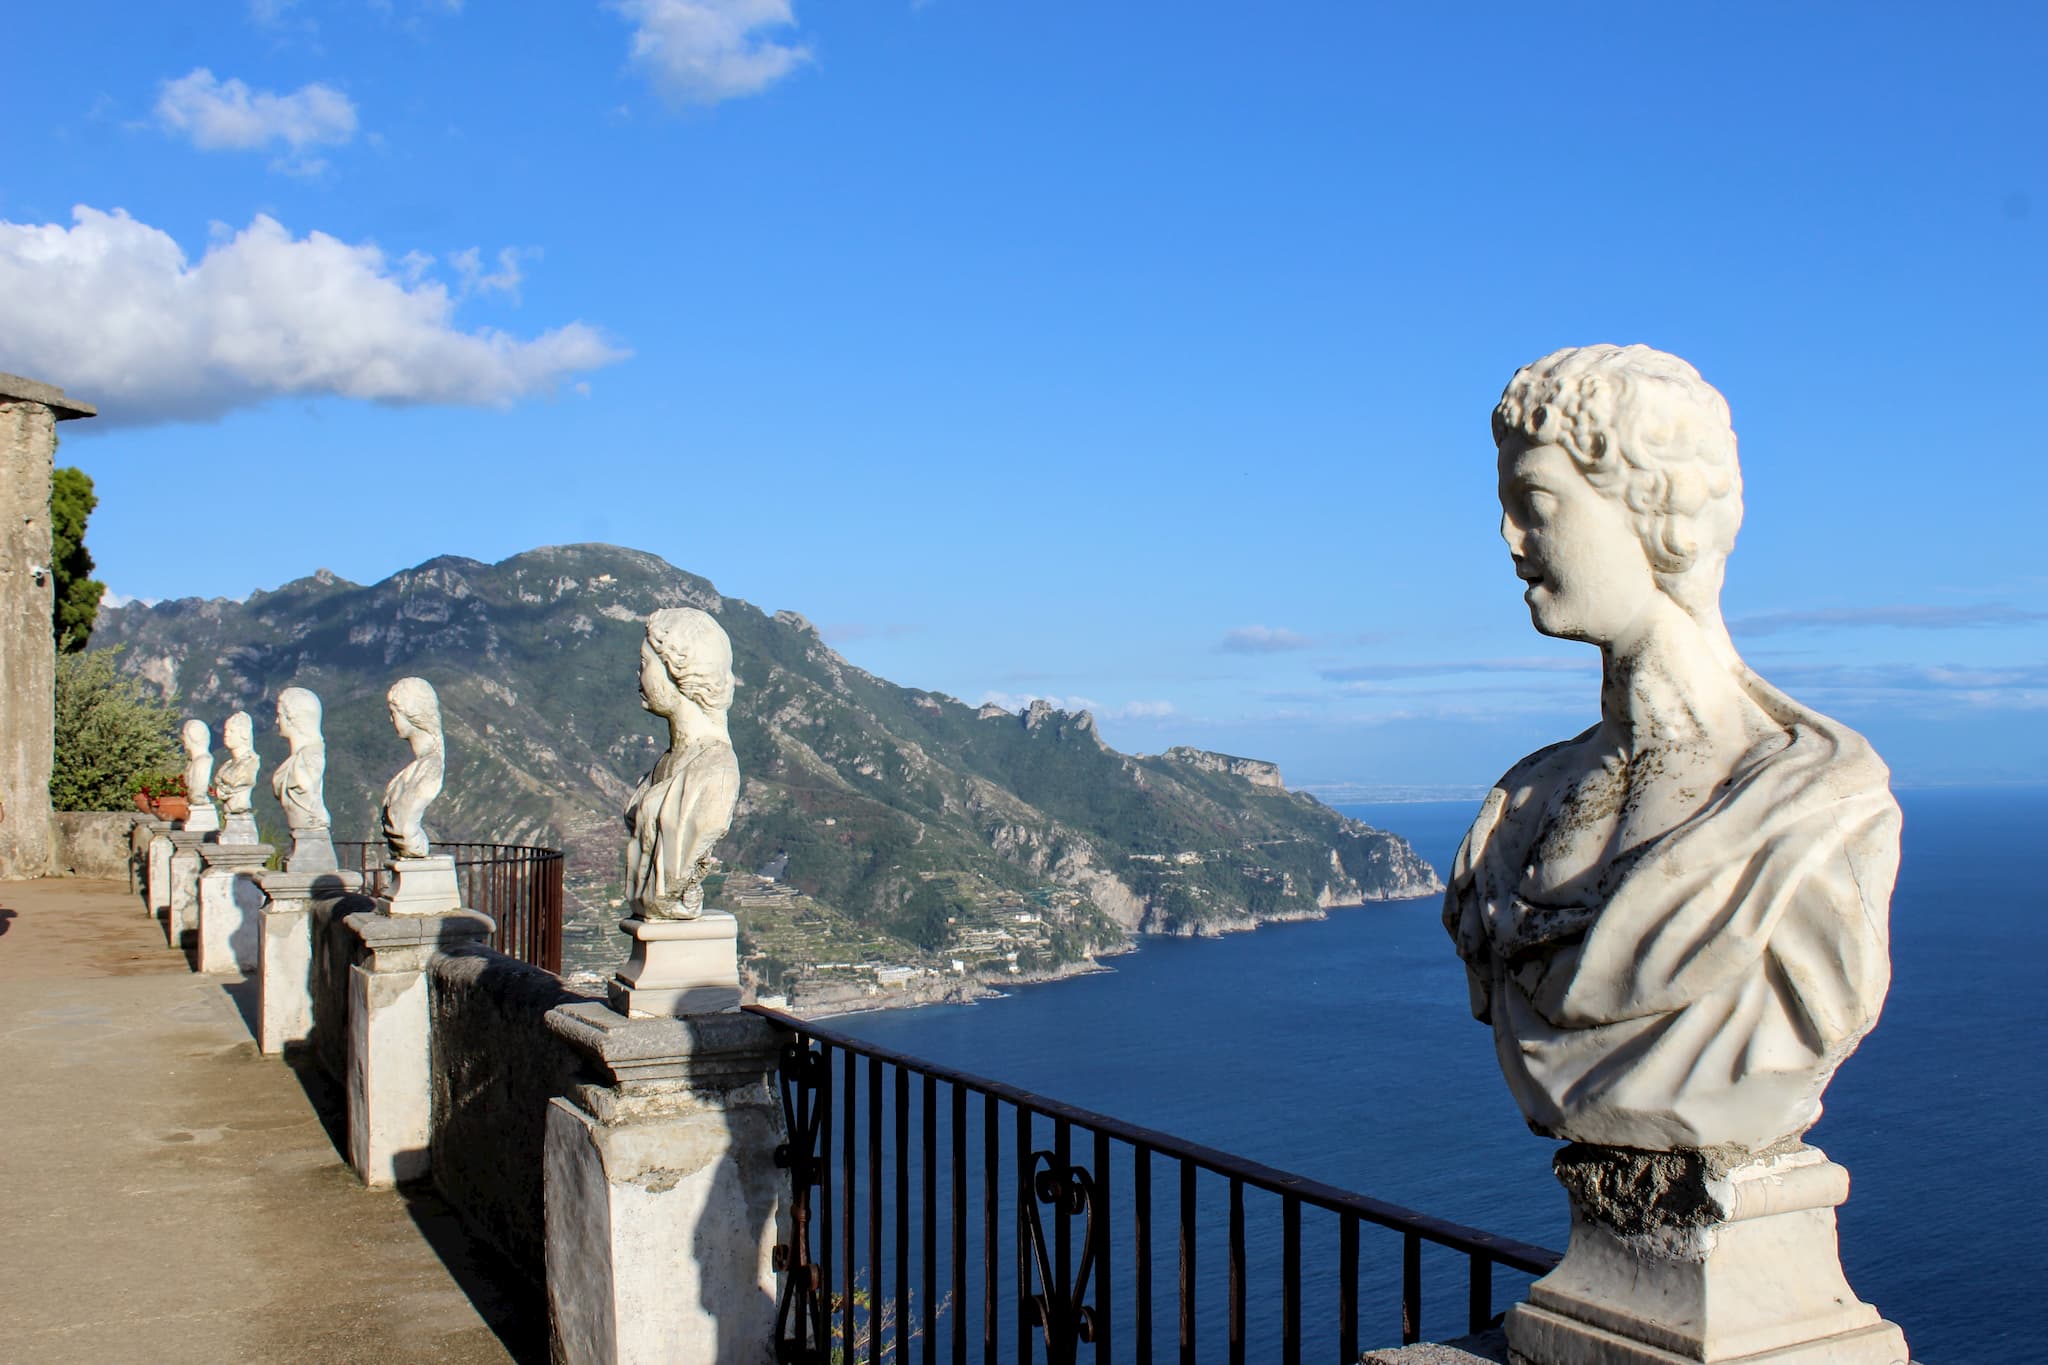 Terrace overlooking the water with stone, carved, busts along the railing